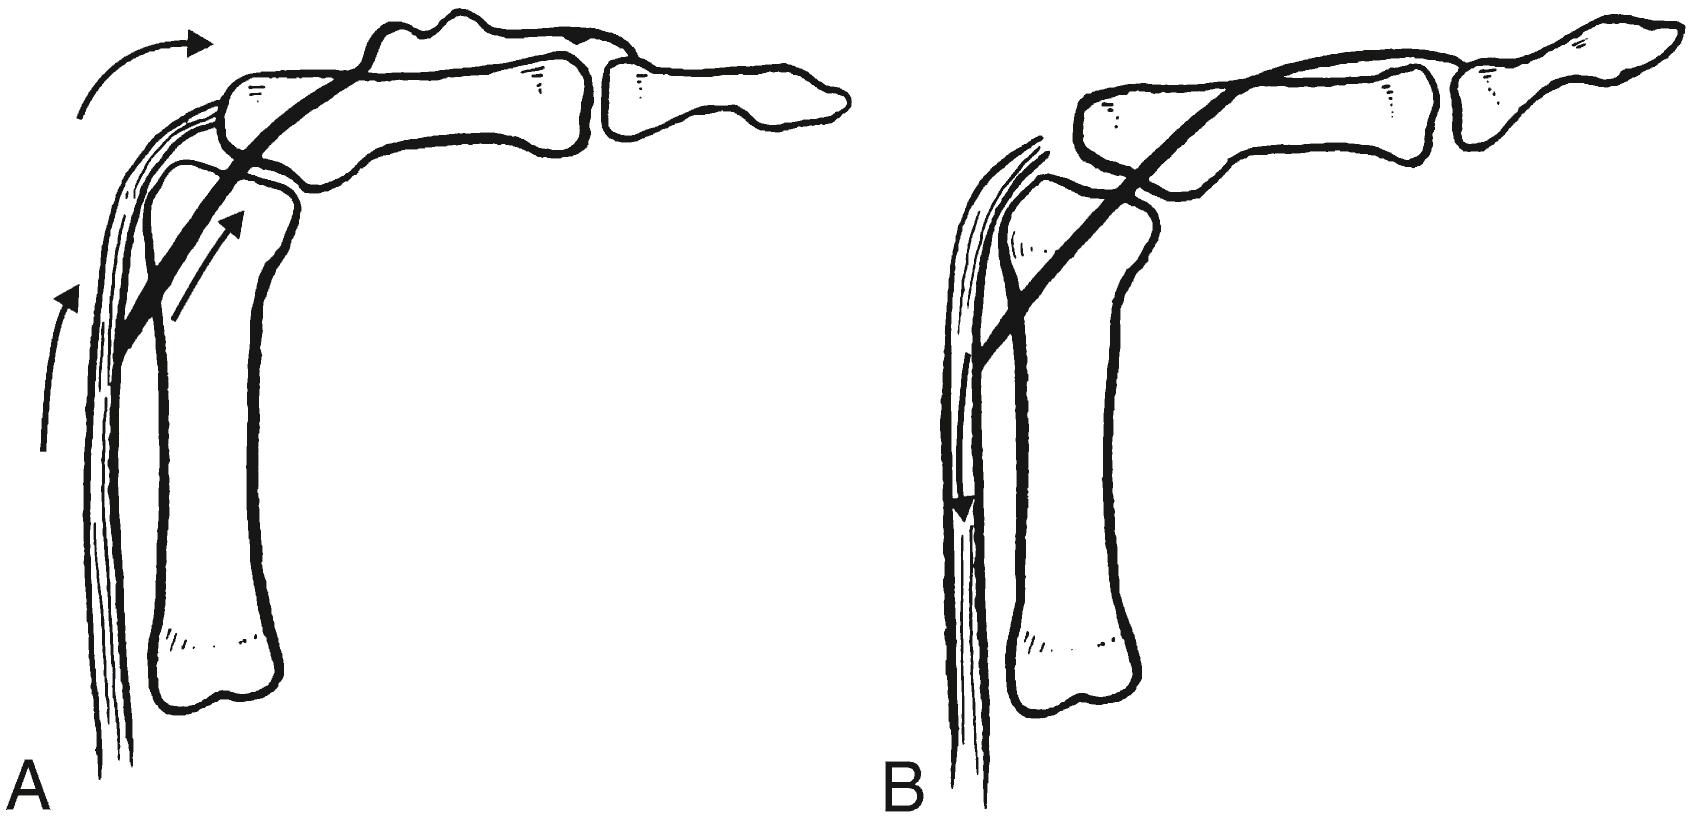 Fig. 70.12, (A) Maximal passive flexion of the proximal interphalangeal (PIP) joint causes slack in the lateral bands because they are pulled distally by their interconnections to the extensor hood proximally as the central slip and extensor tendon are pulled forward. Thus, normally, one cannot actively extend the distal interphalangeal (DIP) joint when the PIP joint is passively flexed. (B) Central slip injury eliminates the lateral band slack that is normally produced by passive PIP joint flexion and allows extensor tension on the DIP joint because of proximal migration of the extensor apparatus. The ability to extend the DIP joint is pathologic.